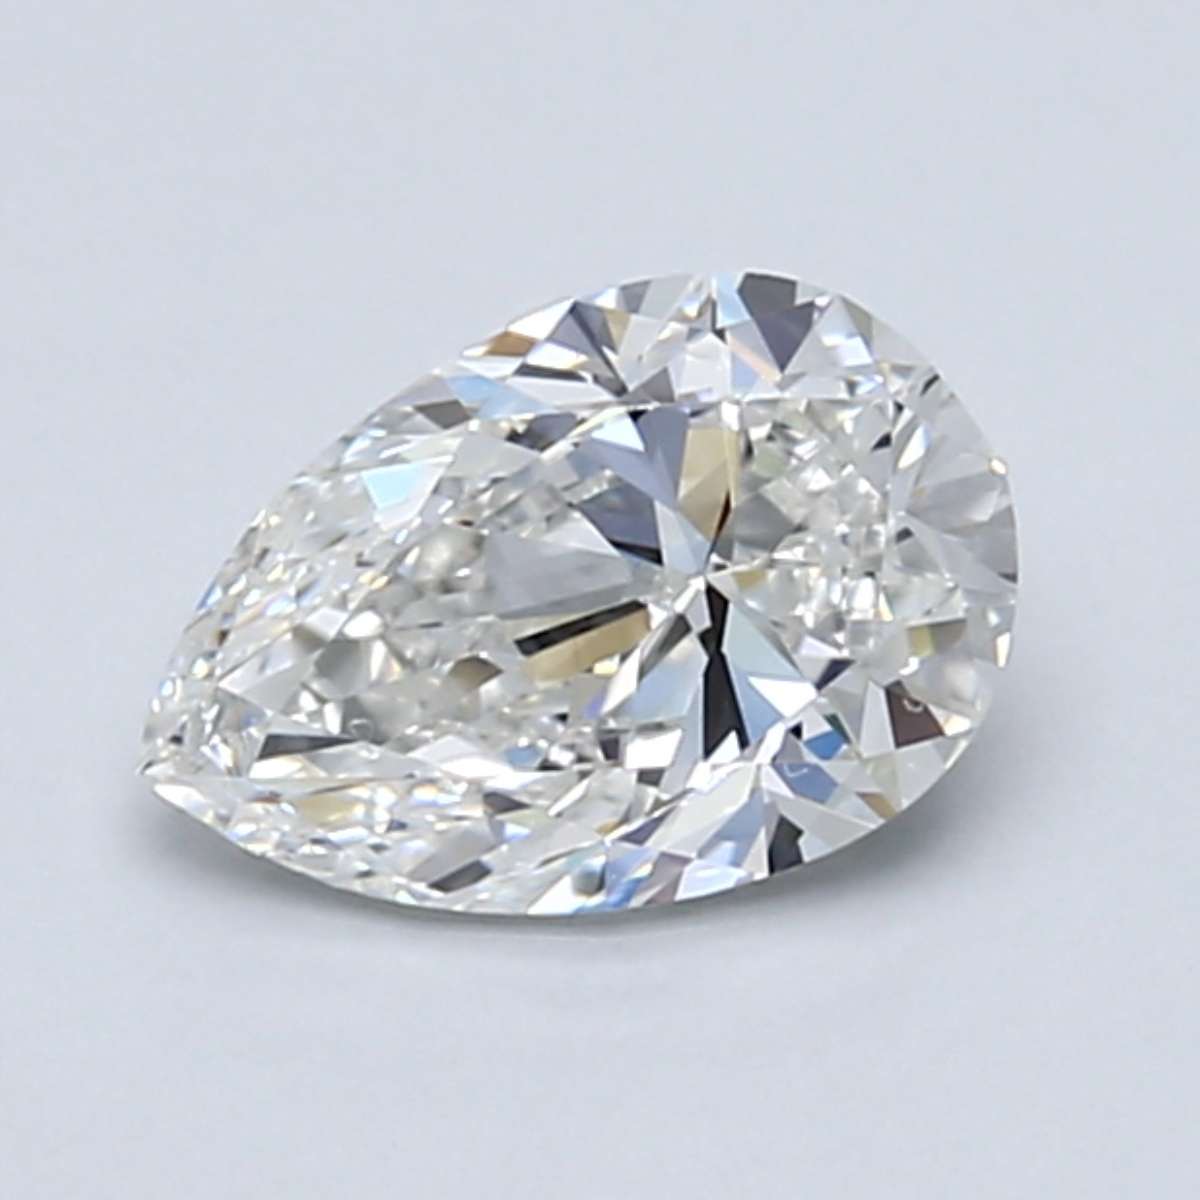 Pear 1.0 Carat G Color VS2 Clarity For Sale